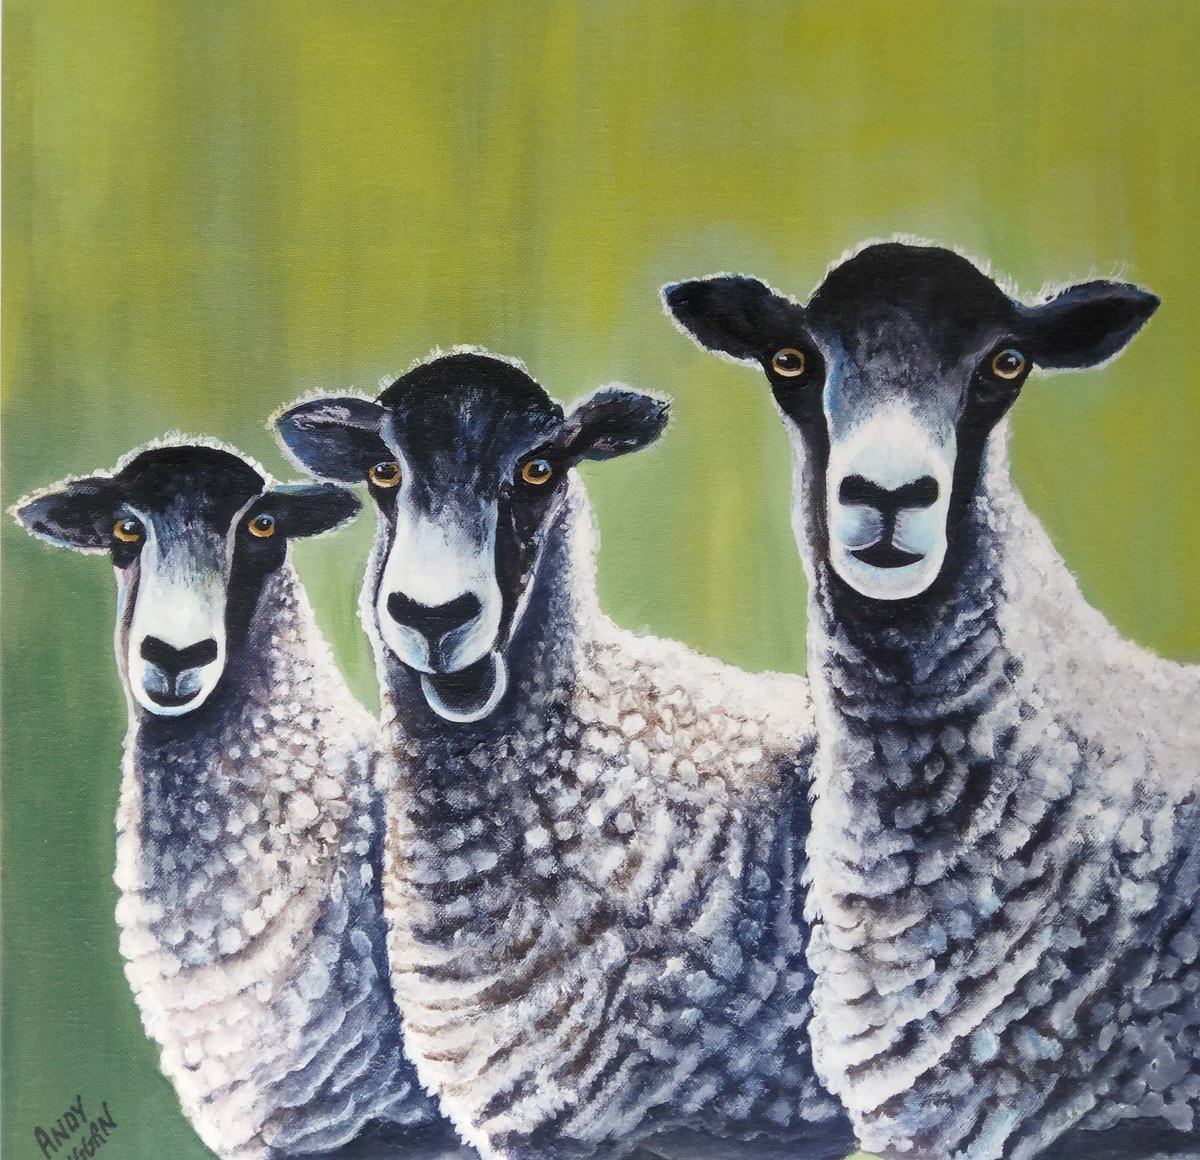 Who are Ewe looking at ? by Andy Duggan